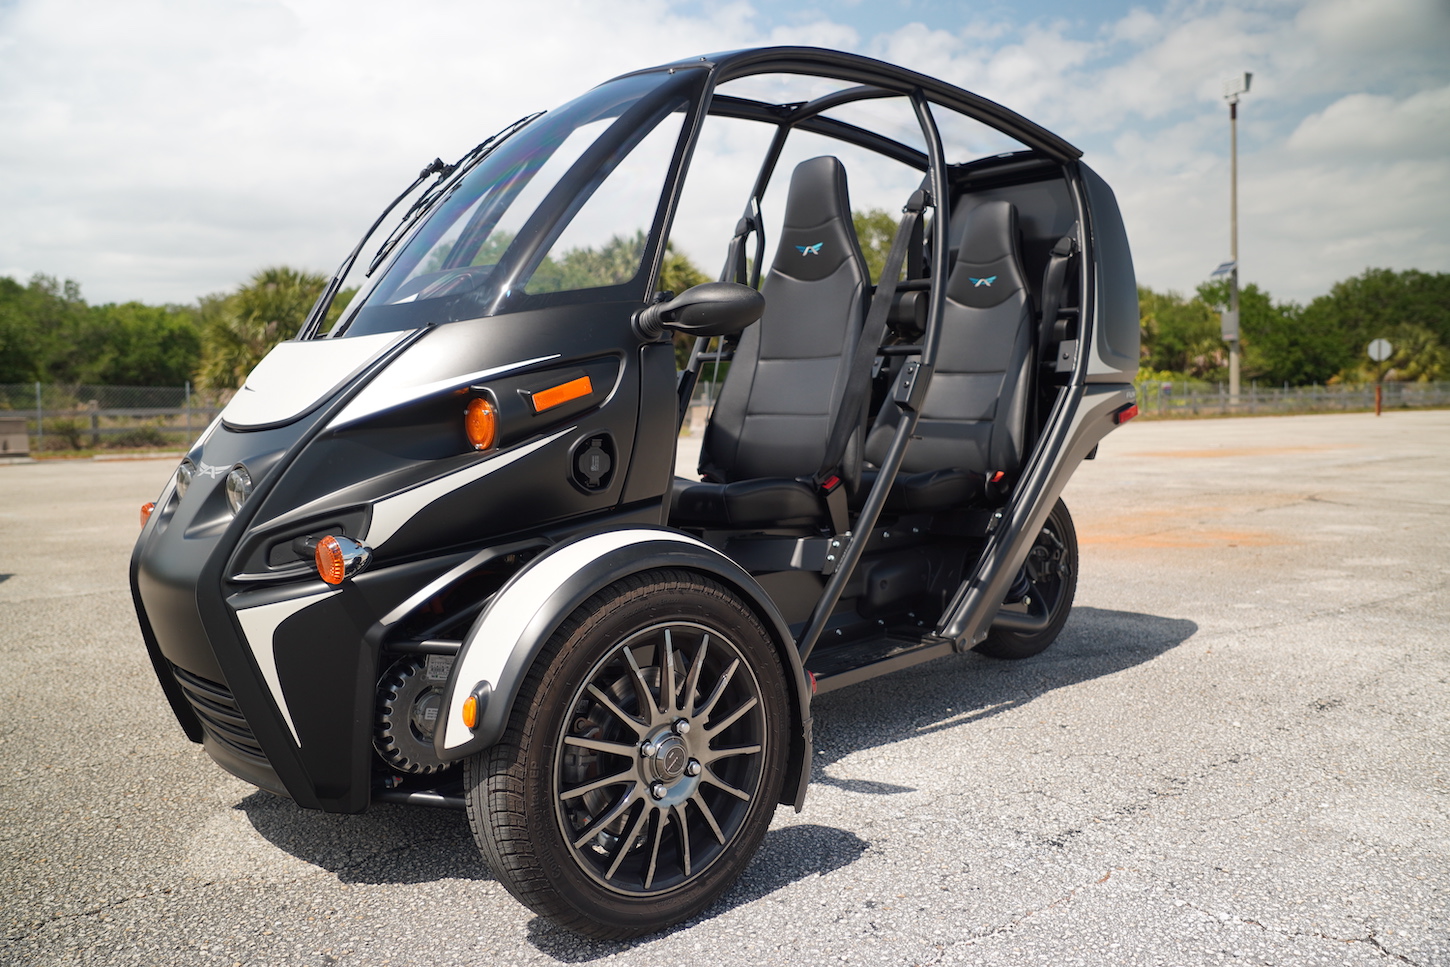 Test ride Arcimoto 3wheeled electric vehicles, cranking fun to the max!